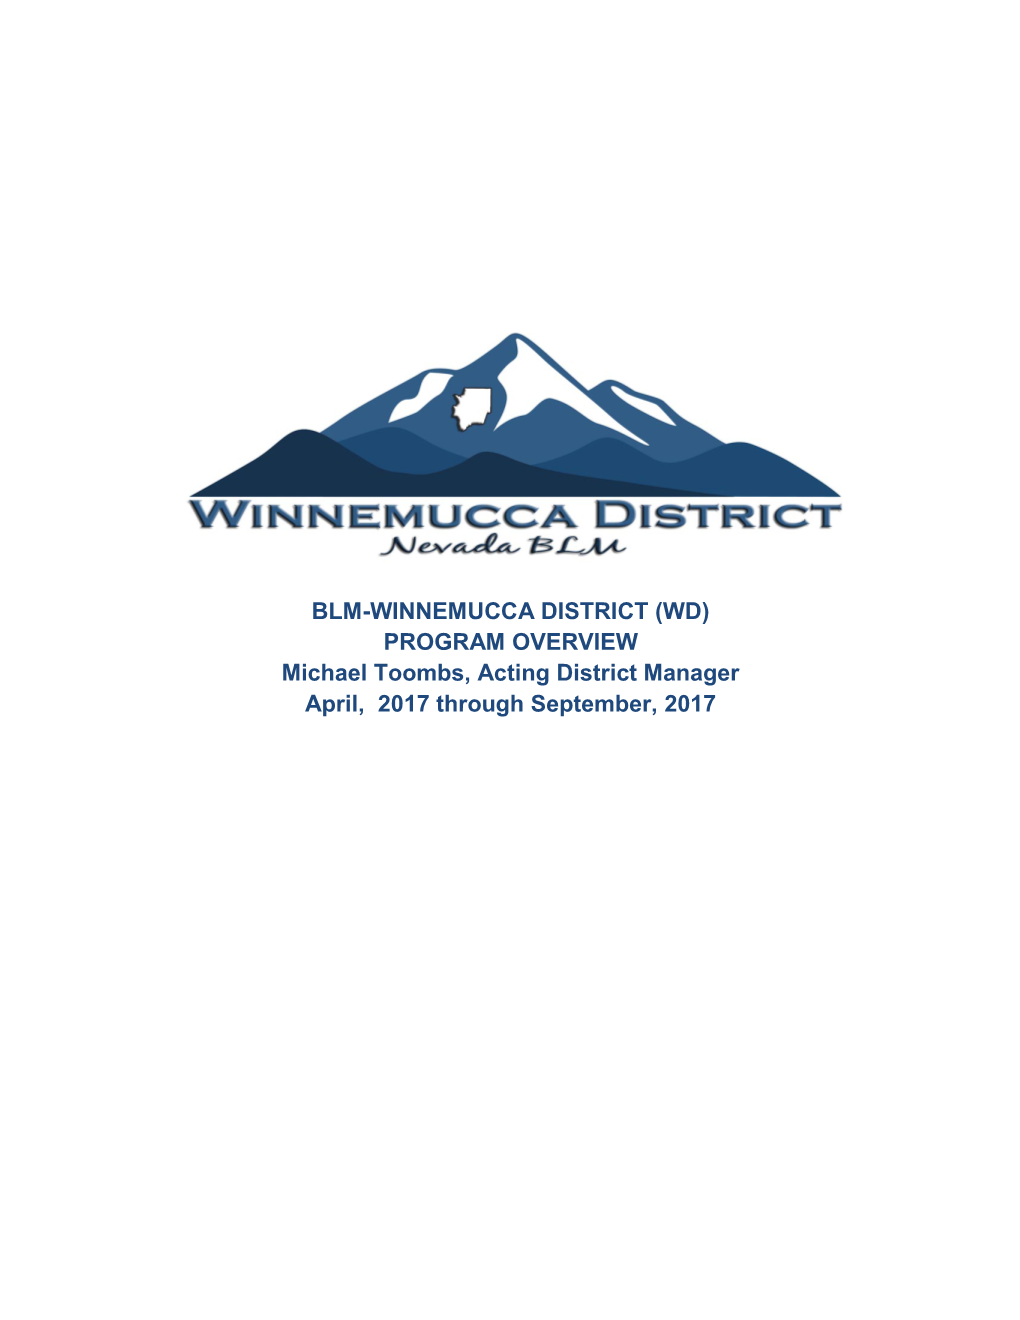 Winnemucca District Manager Report